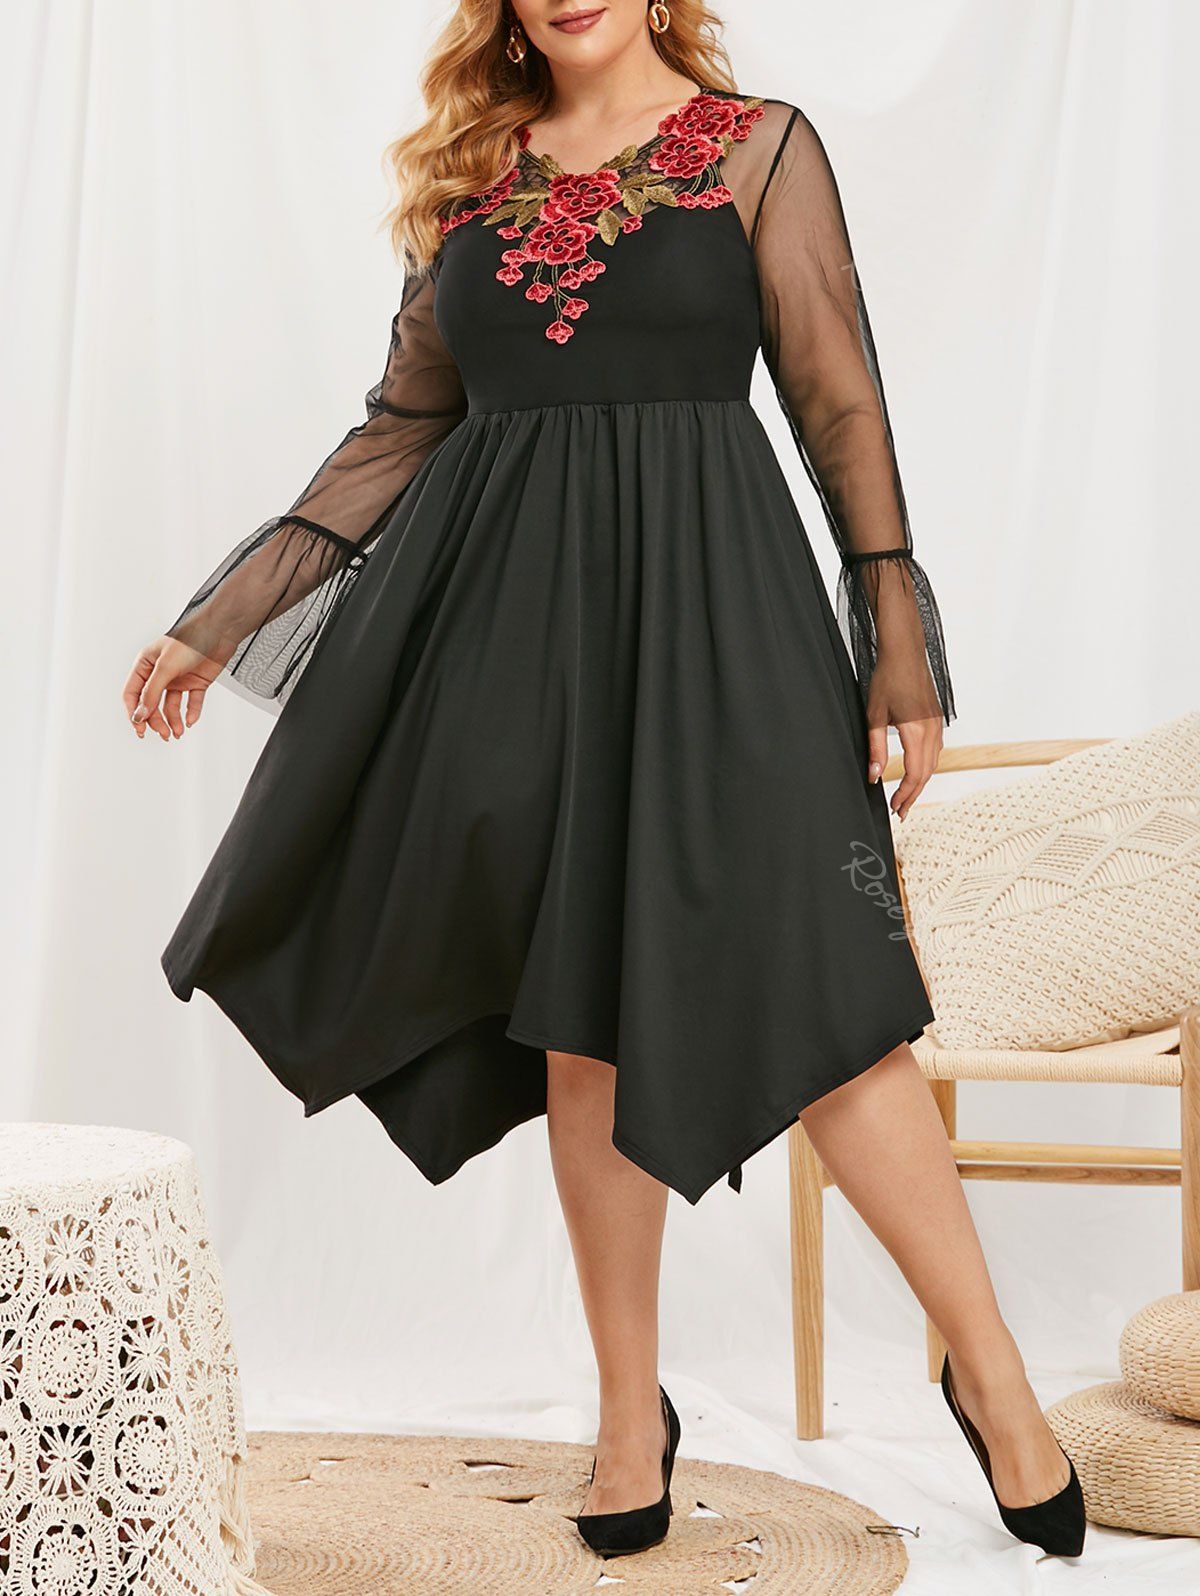 Discount Plus Size Flower Applique Lace Flare Sleeve Dress with Camisole  